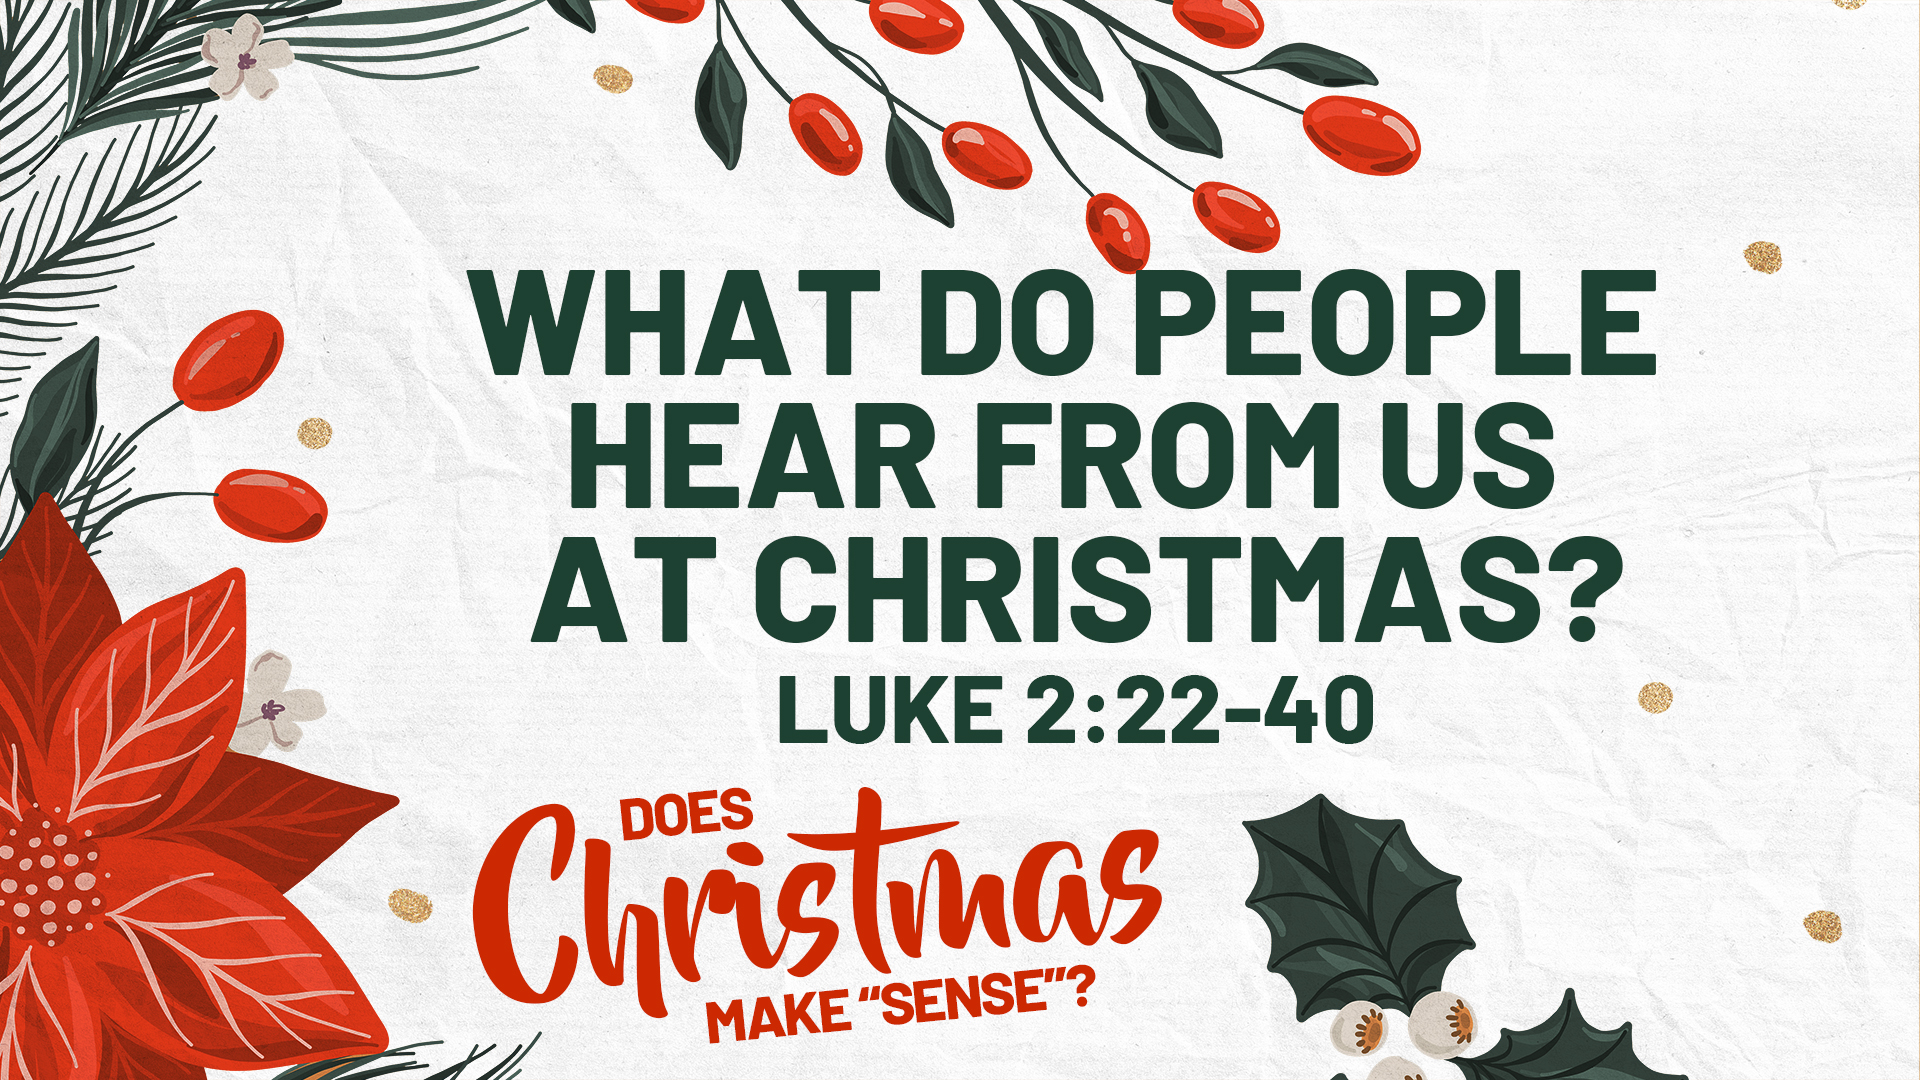 What do People Hear from us at Christmas?